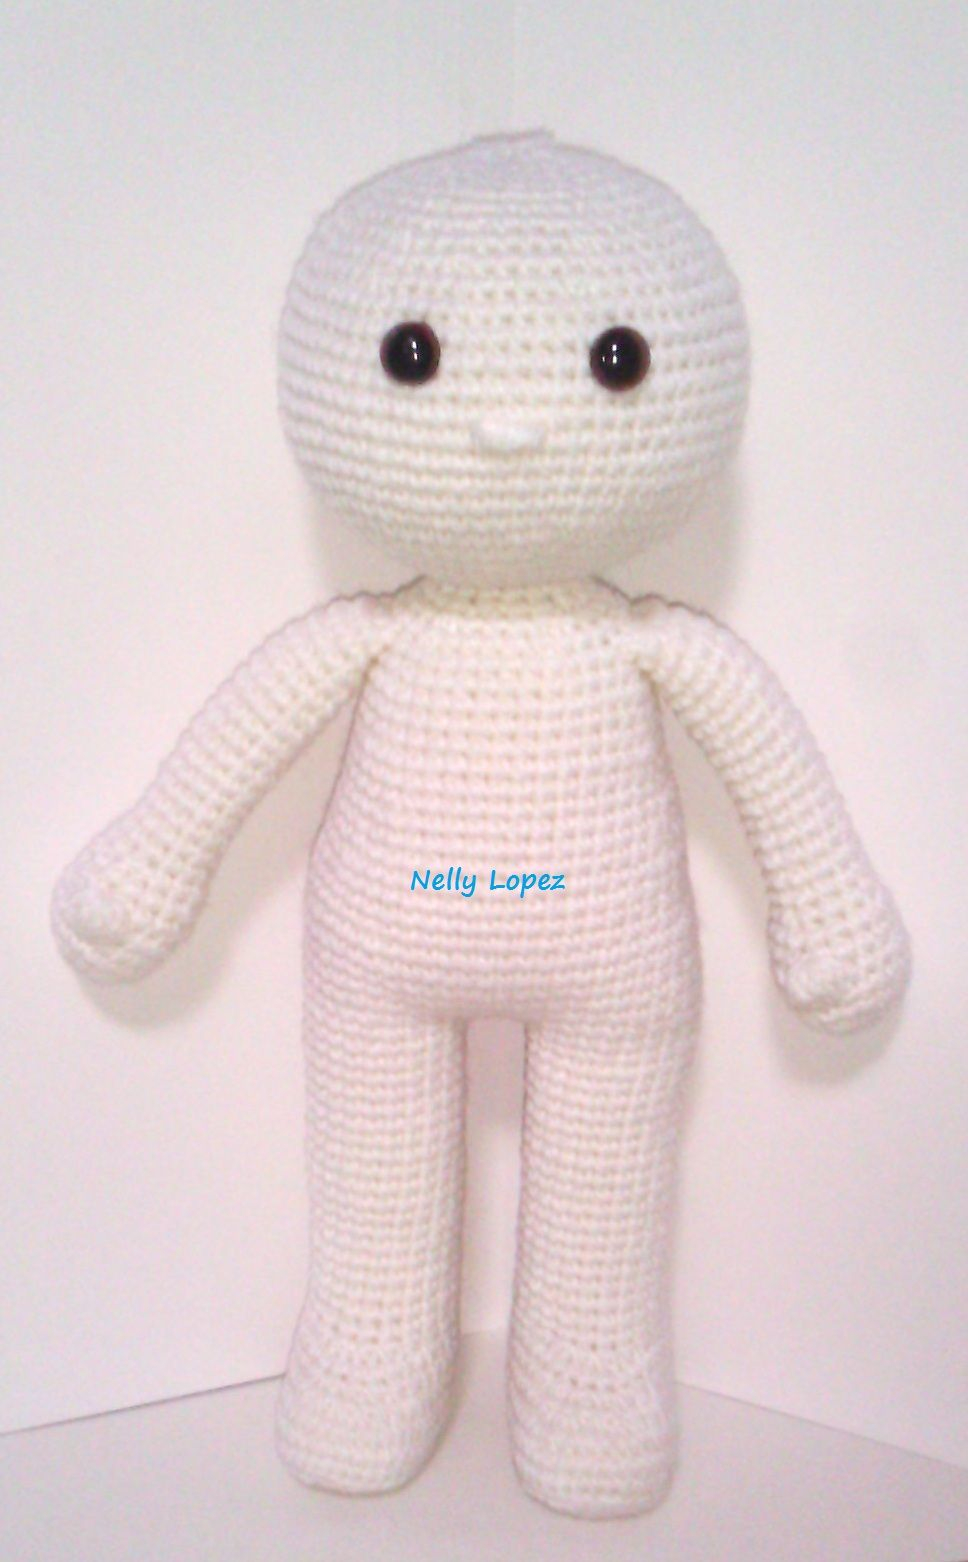 Crochet Amigurumi Doll Pattern A Blog About Patterns For Making Crocheted Doll Doll Clothing And